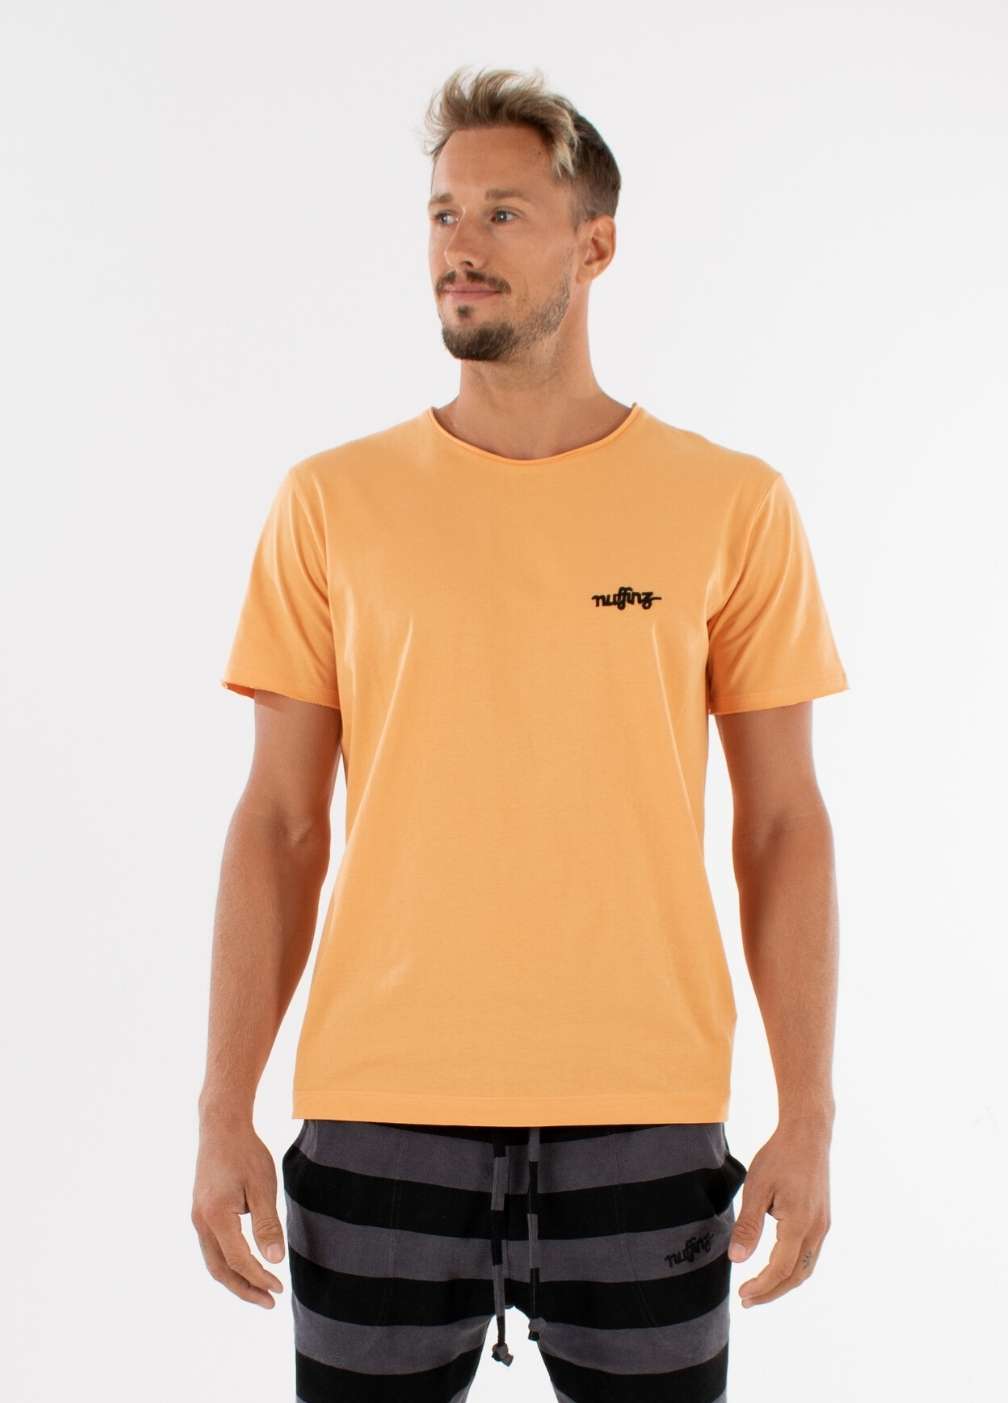 nuffinz GOLD EARTH T-SHIRT PURE - whole outfit visible from the front - sustainable men's t shirts - orange